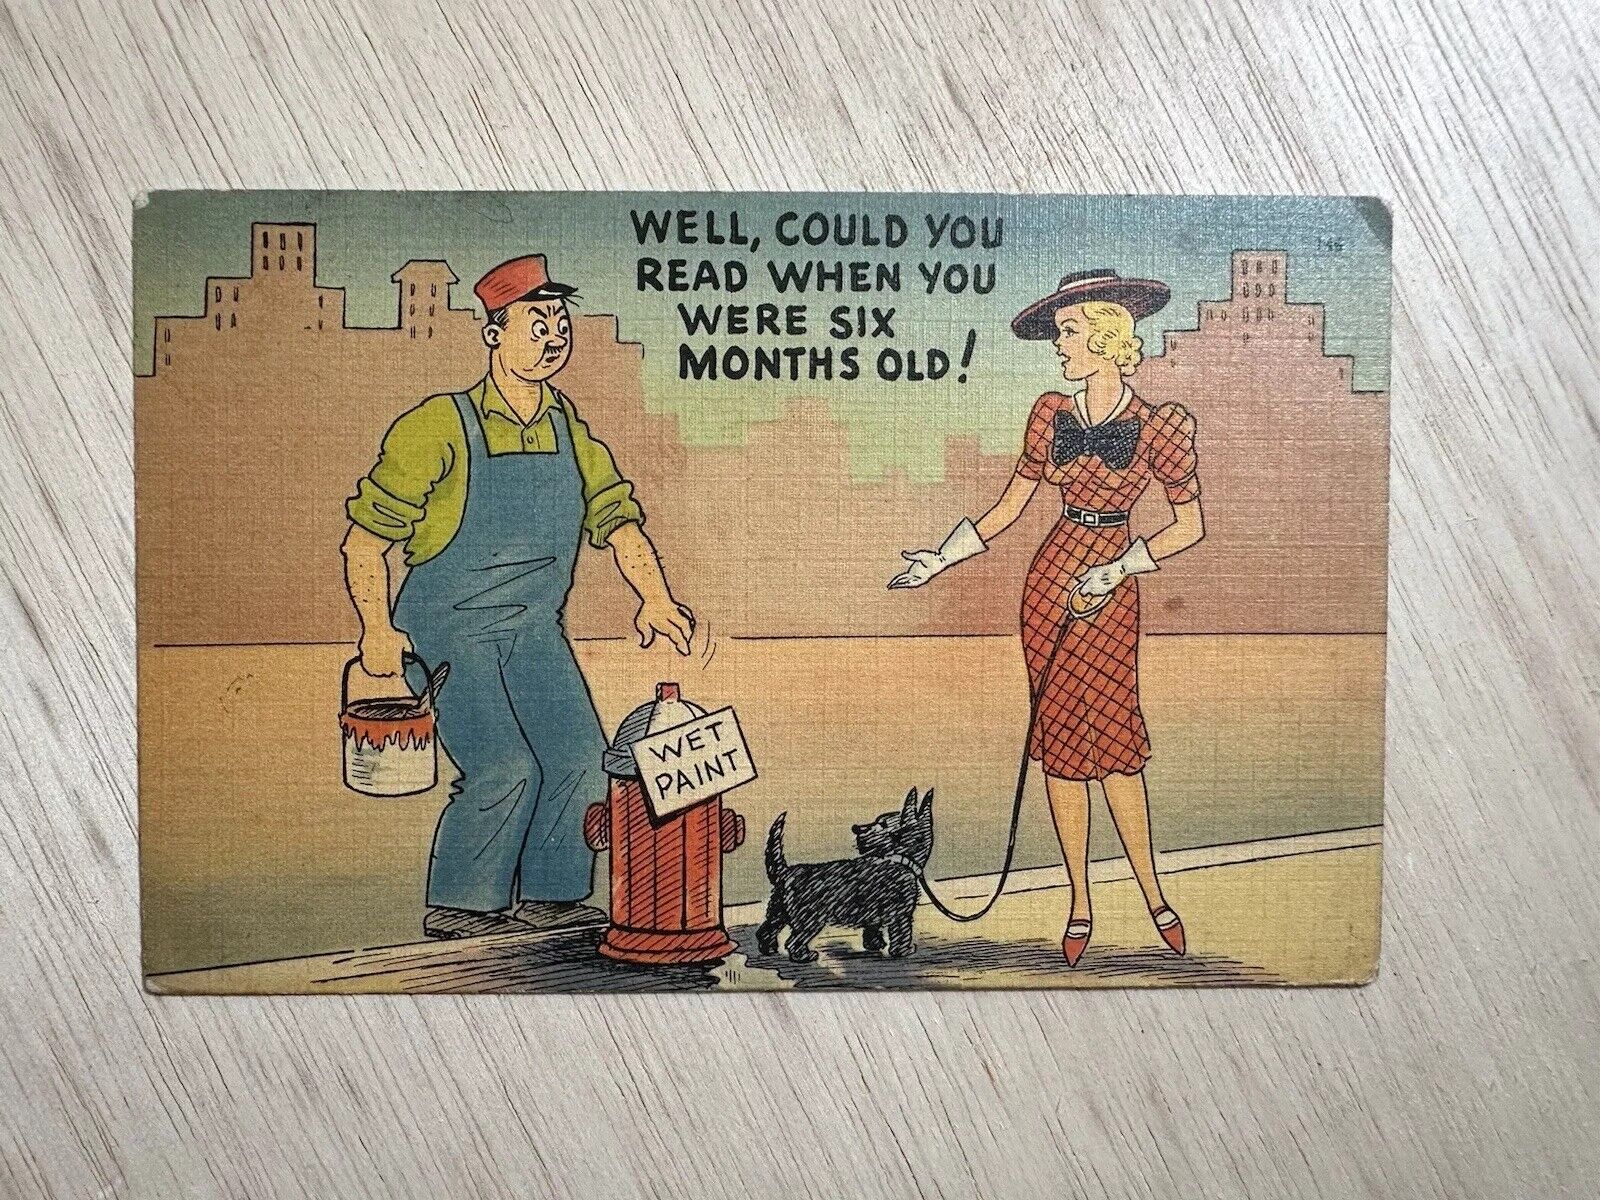 1945 Comical Postcard With Women Dog And Man